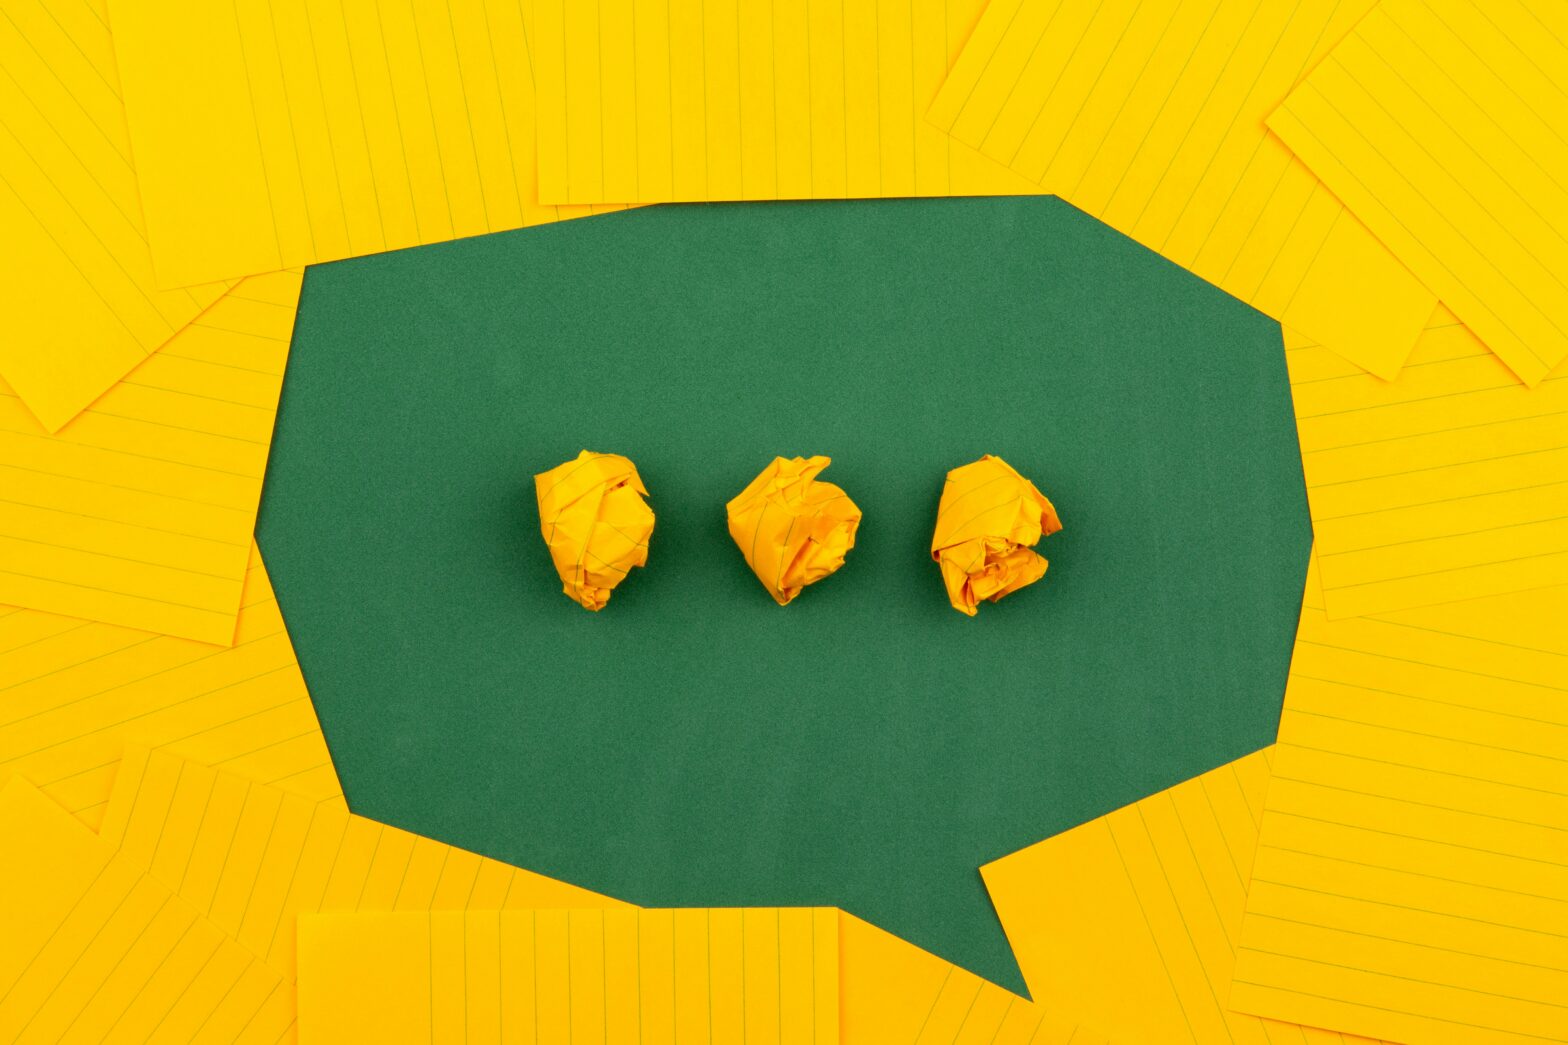 Verbal Behavioural Intelligence, illustrated by orange sheets of paper lie on a green school board and form a chat bubble with three crumpled papers. Photo by Volodymyr Hryshchenko on Unsplash